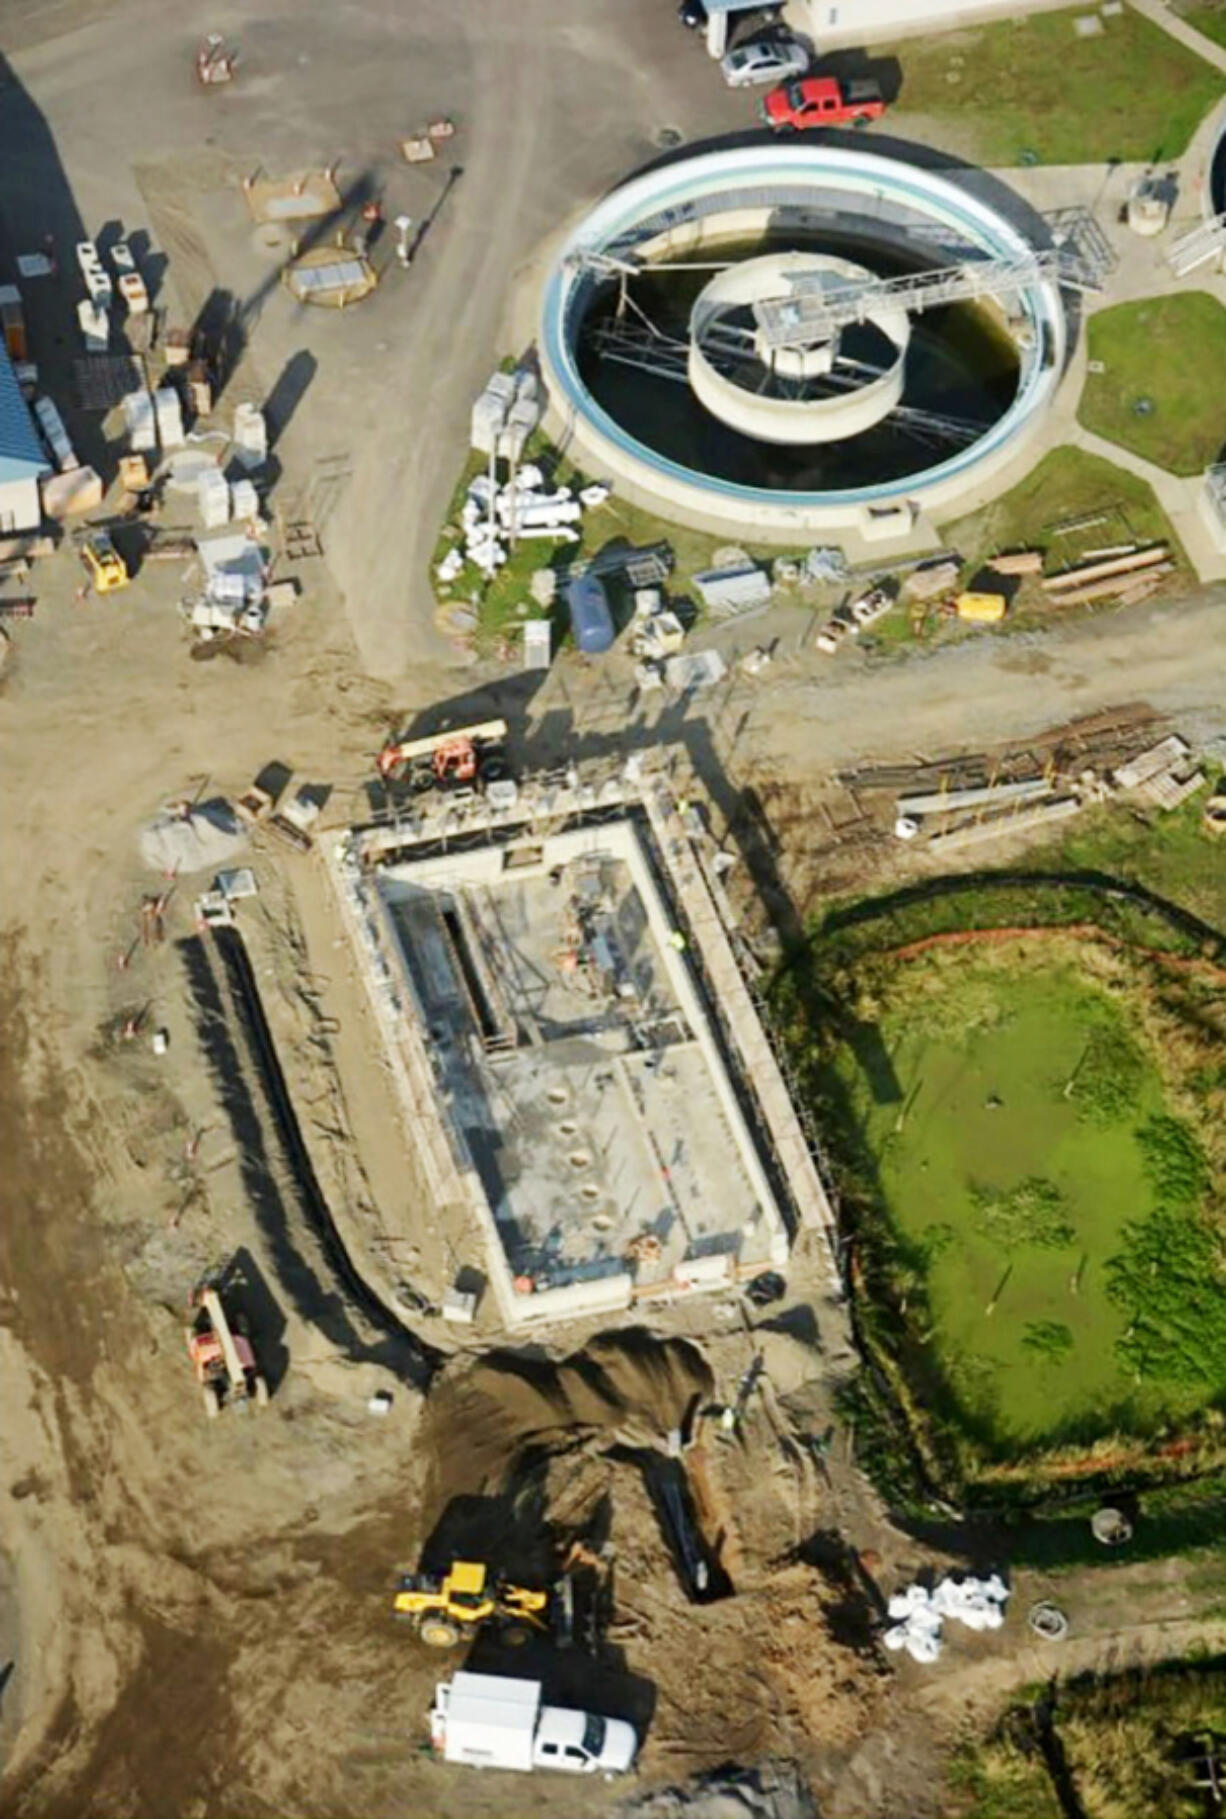 The city of Washougal&rsquo;s wastewater treatment plant will soon receive a $34.5 million upgrade.